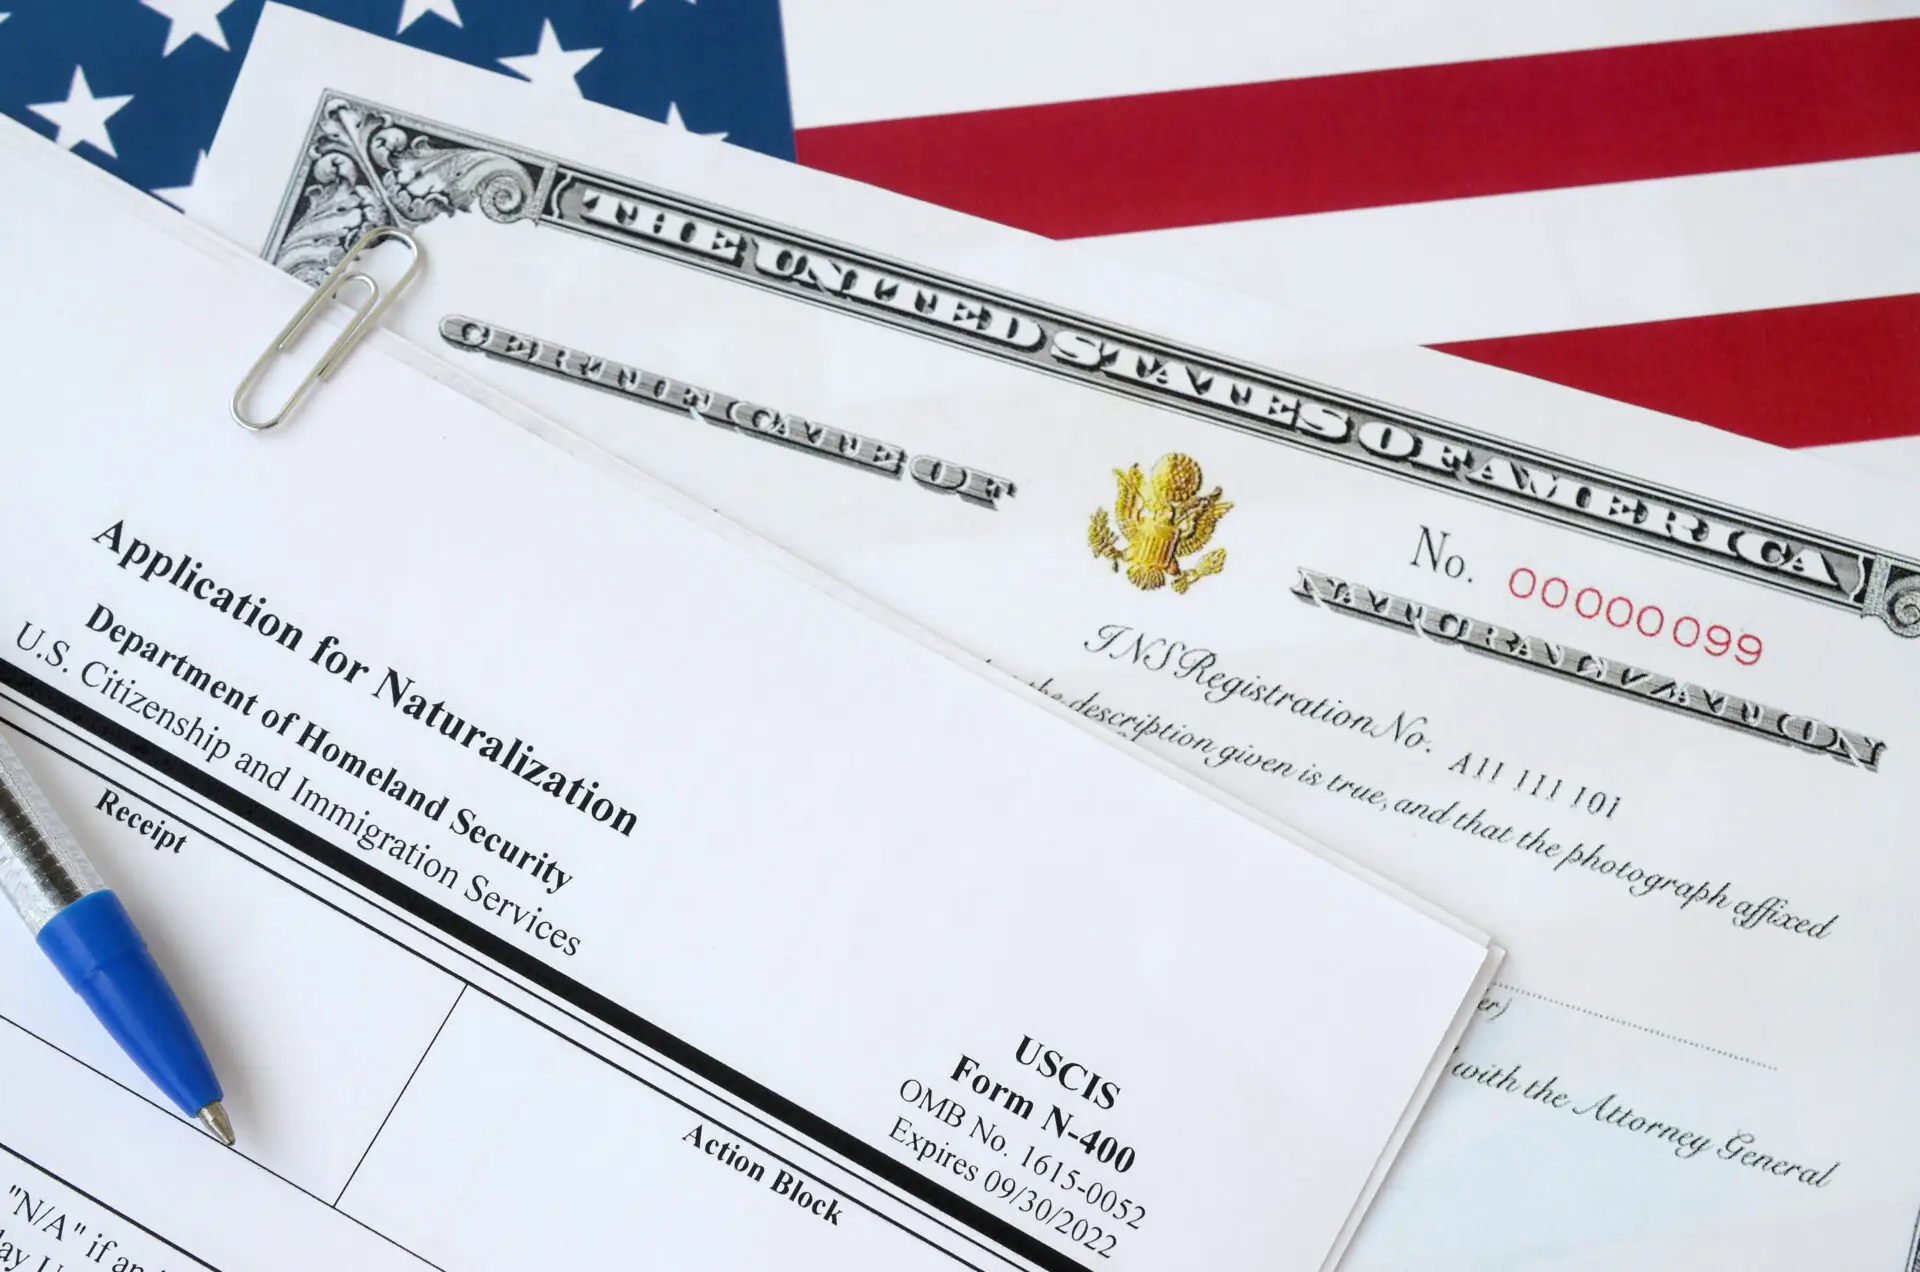 N-400 Application for Naturalization and Certificate of naturalization lies on United States flag with blue pen from Department of Homeland Security